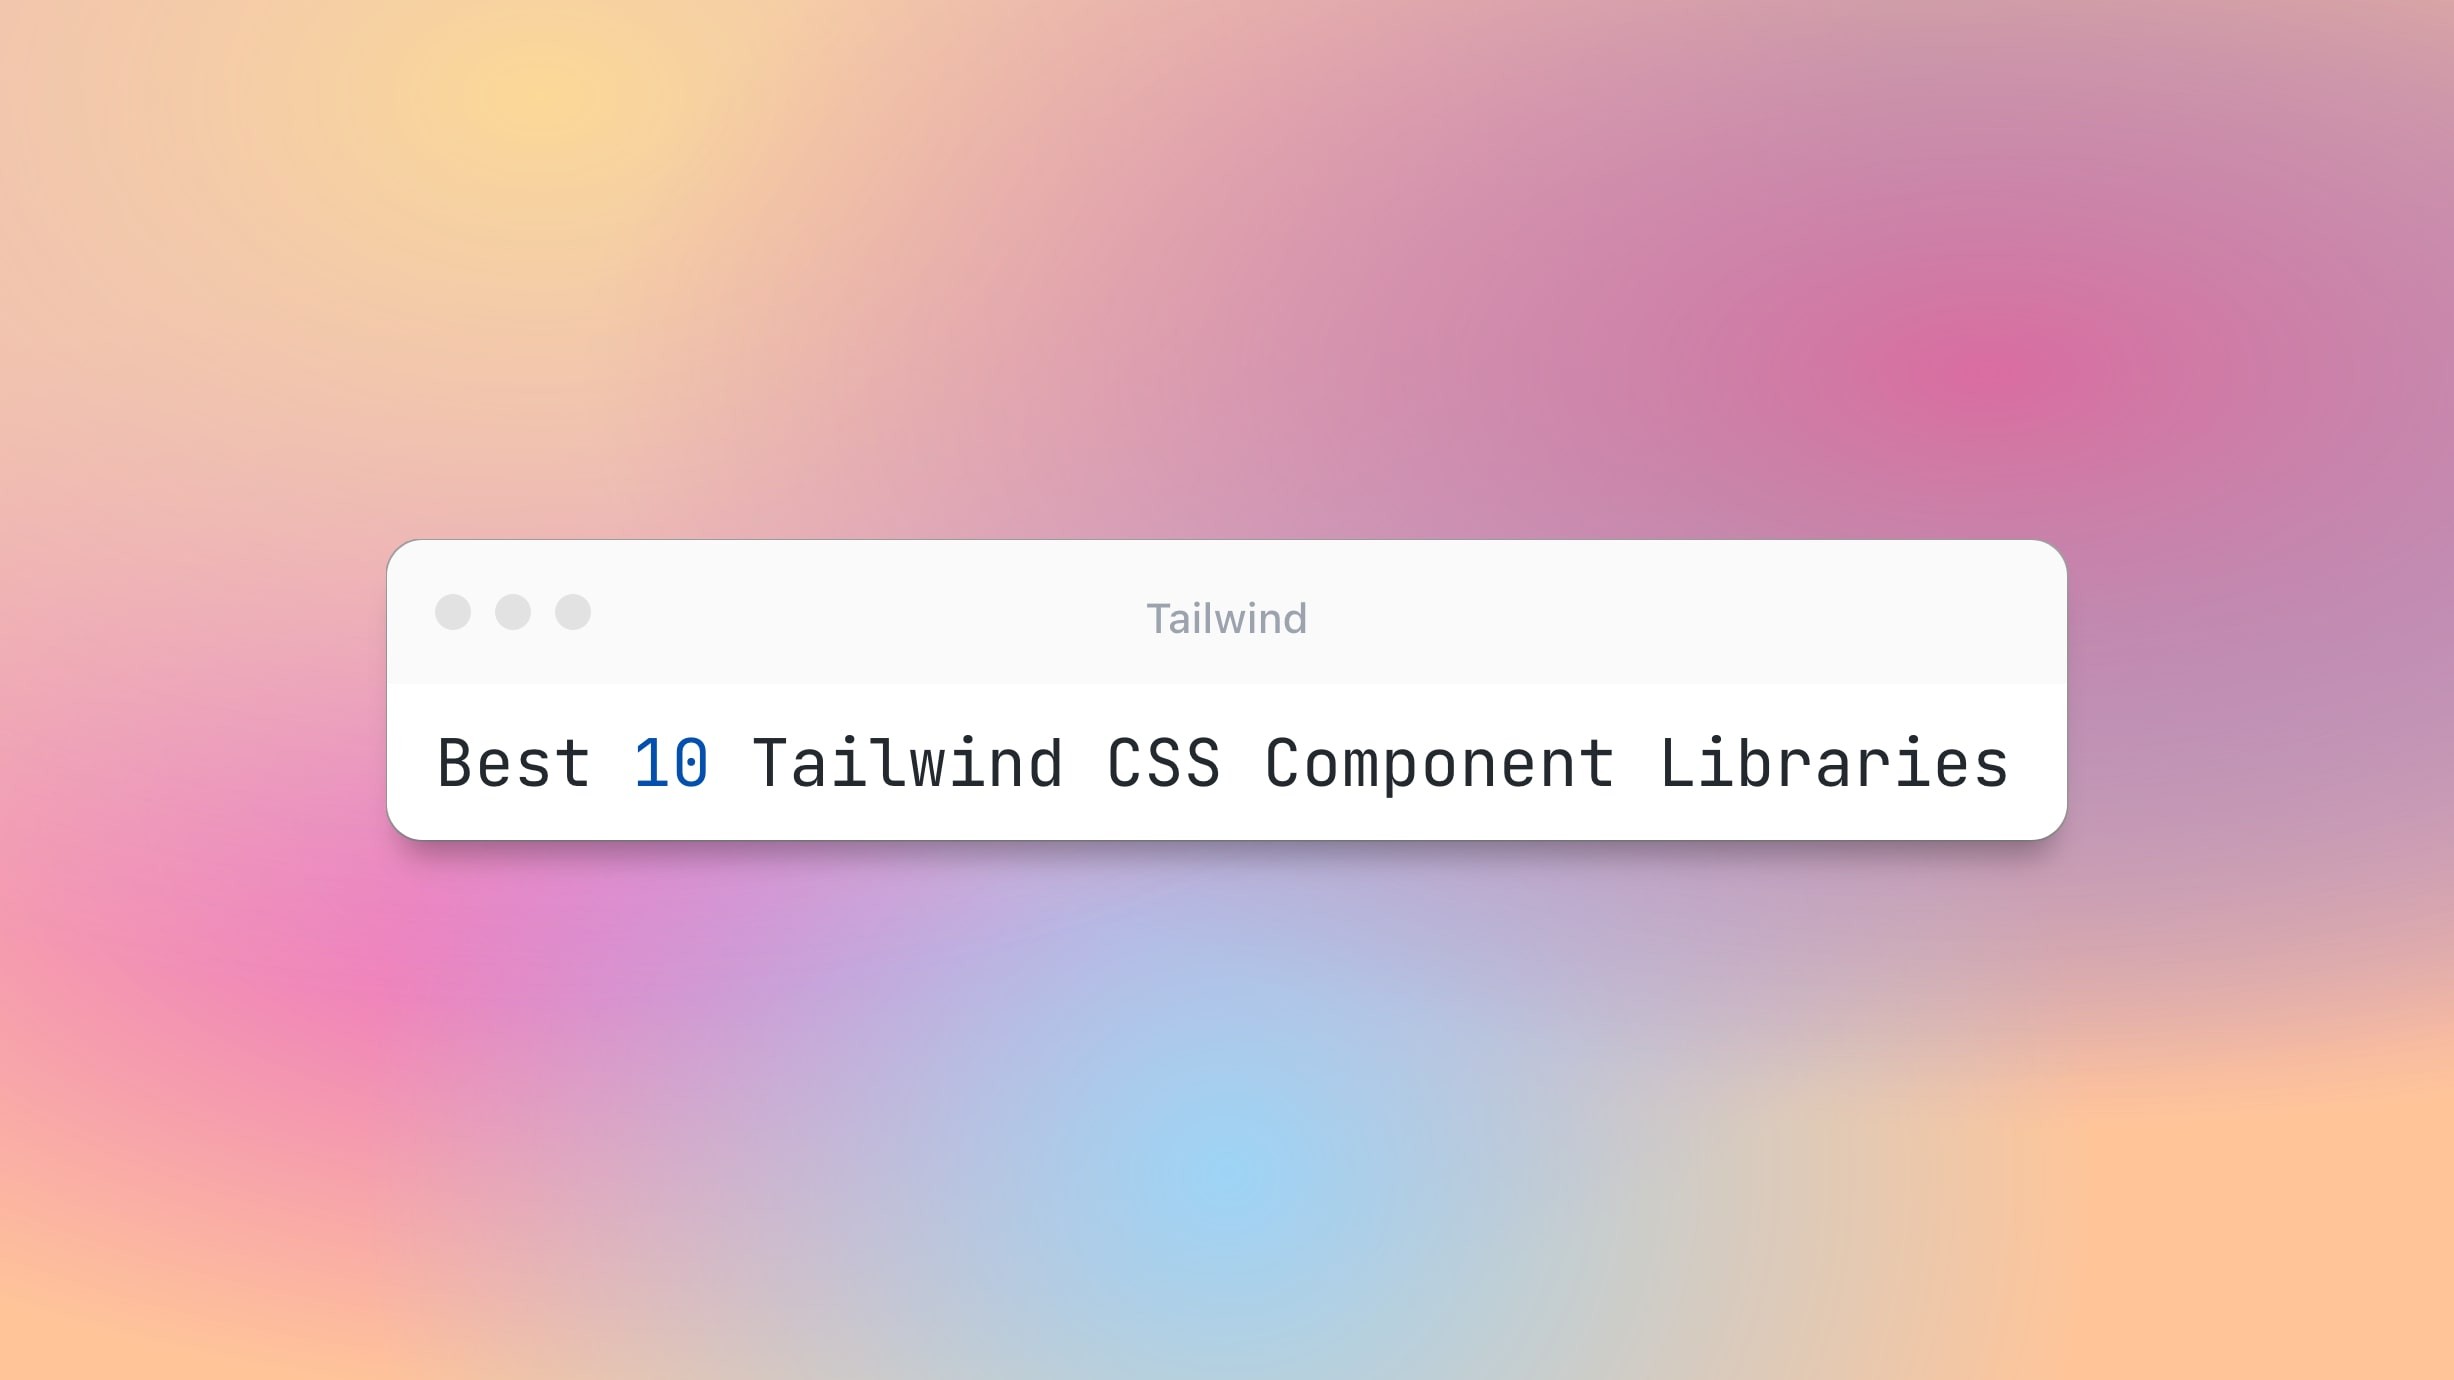 Best 10 Tailwind CSS Component Libraries